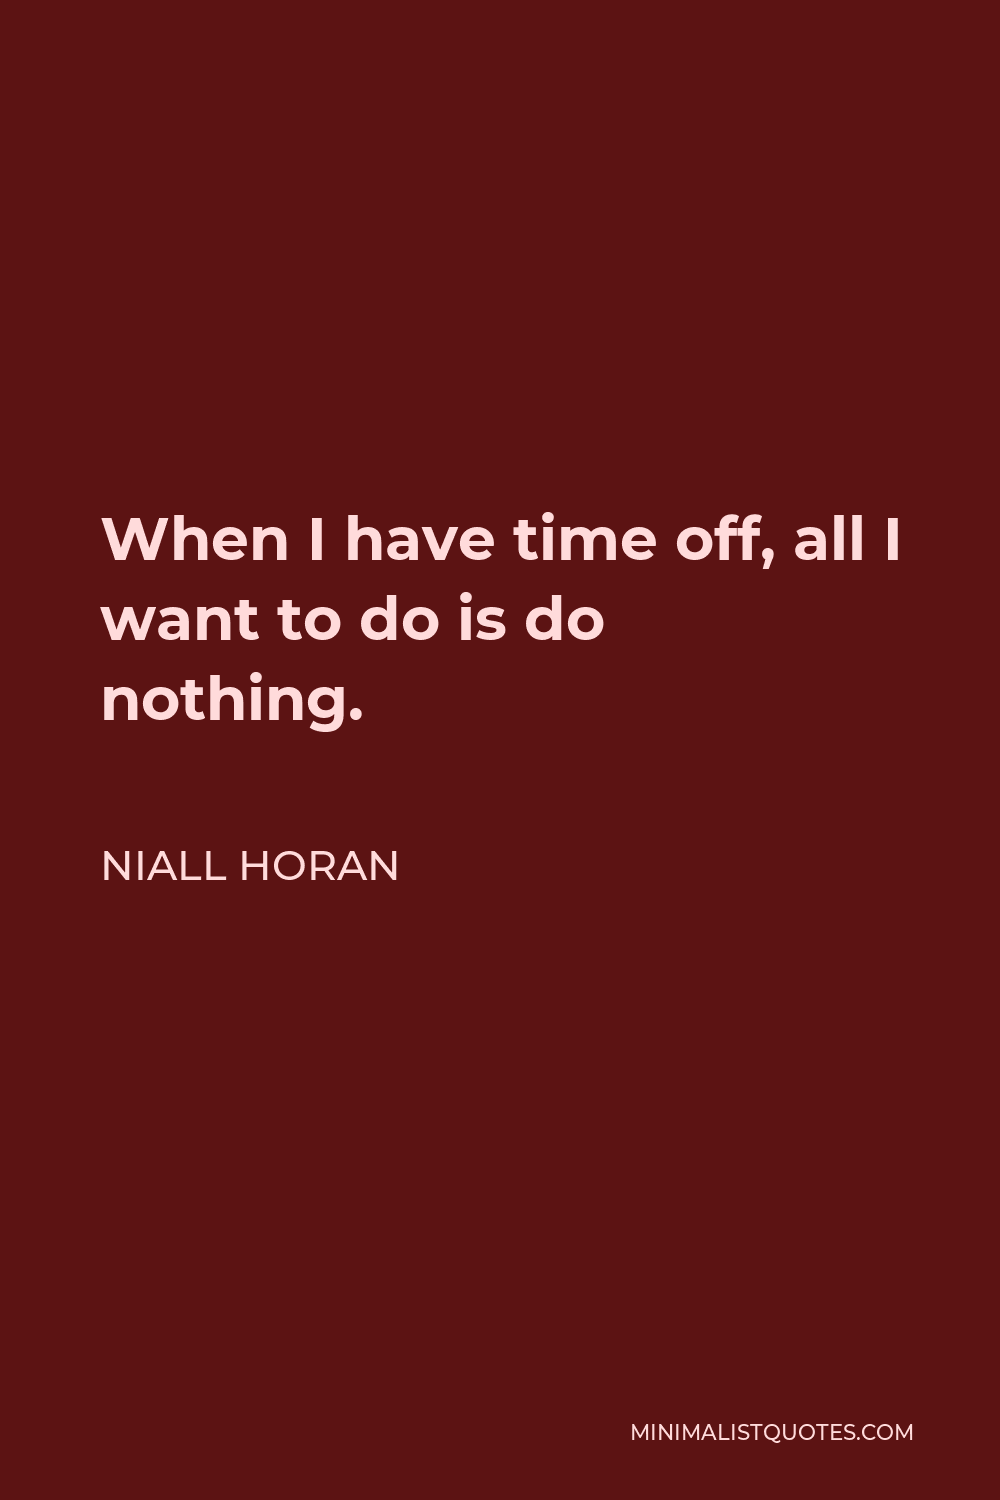 Niall Horan Quote - When I have time off, all I want to do is do nothing.